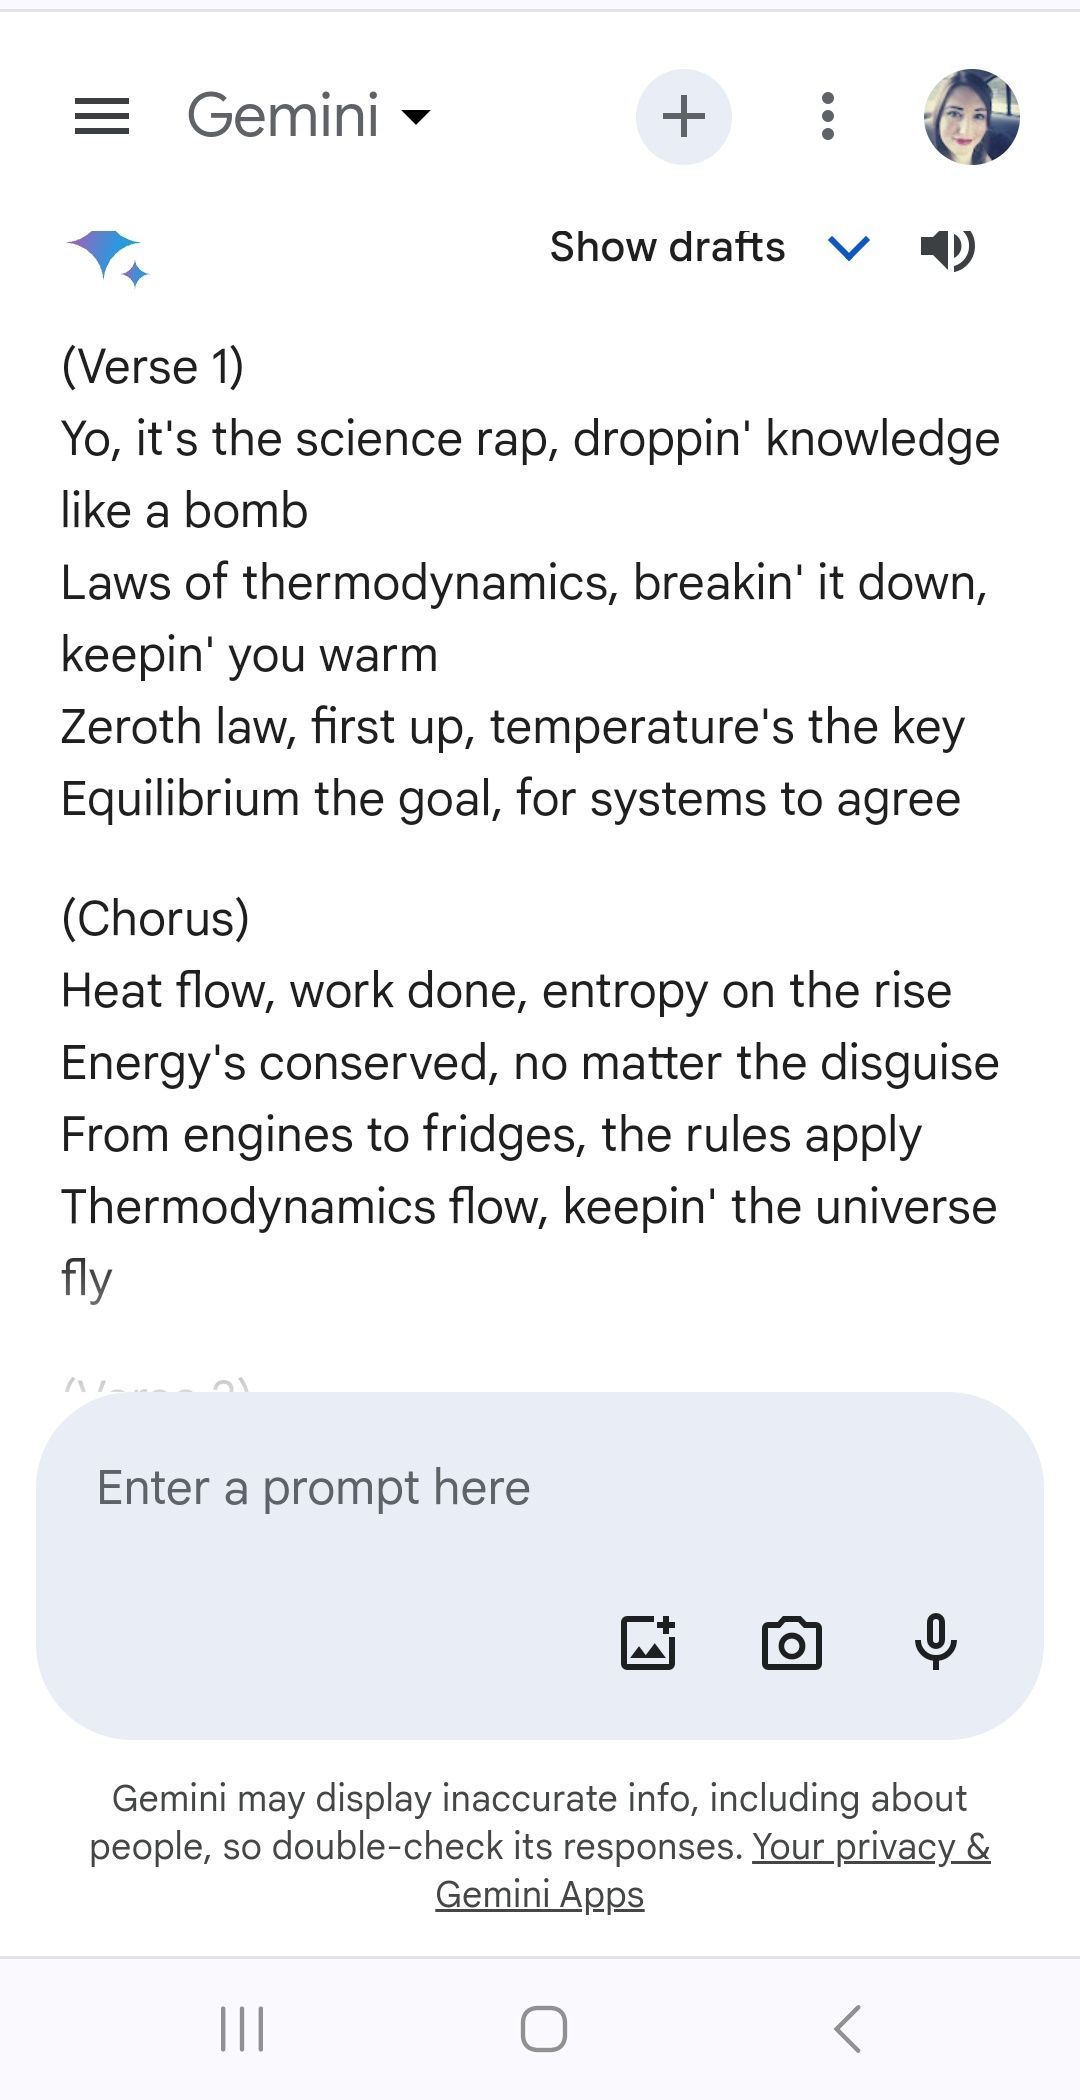 google gemini rap song response containing all the laws of thermodynamics